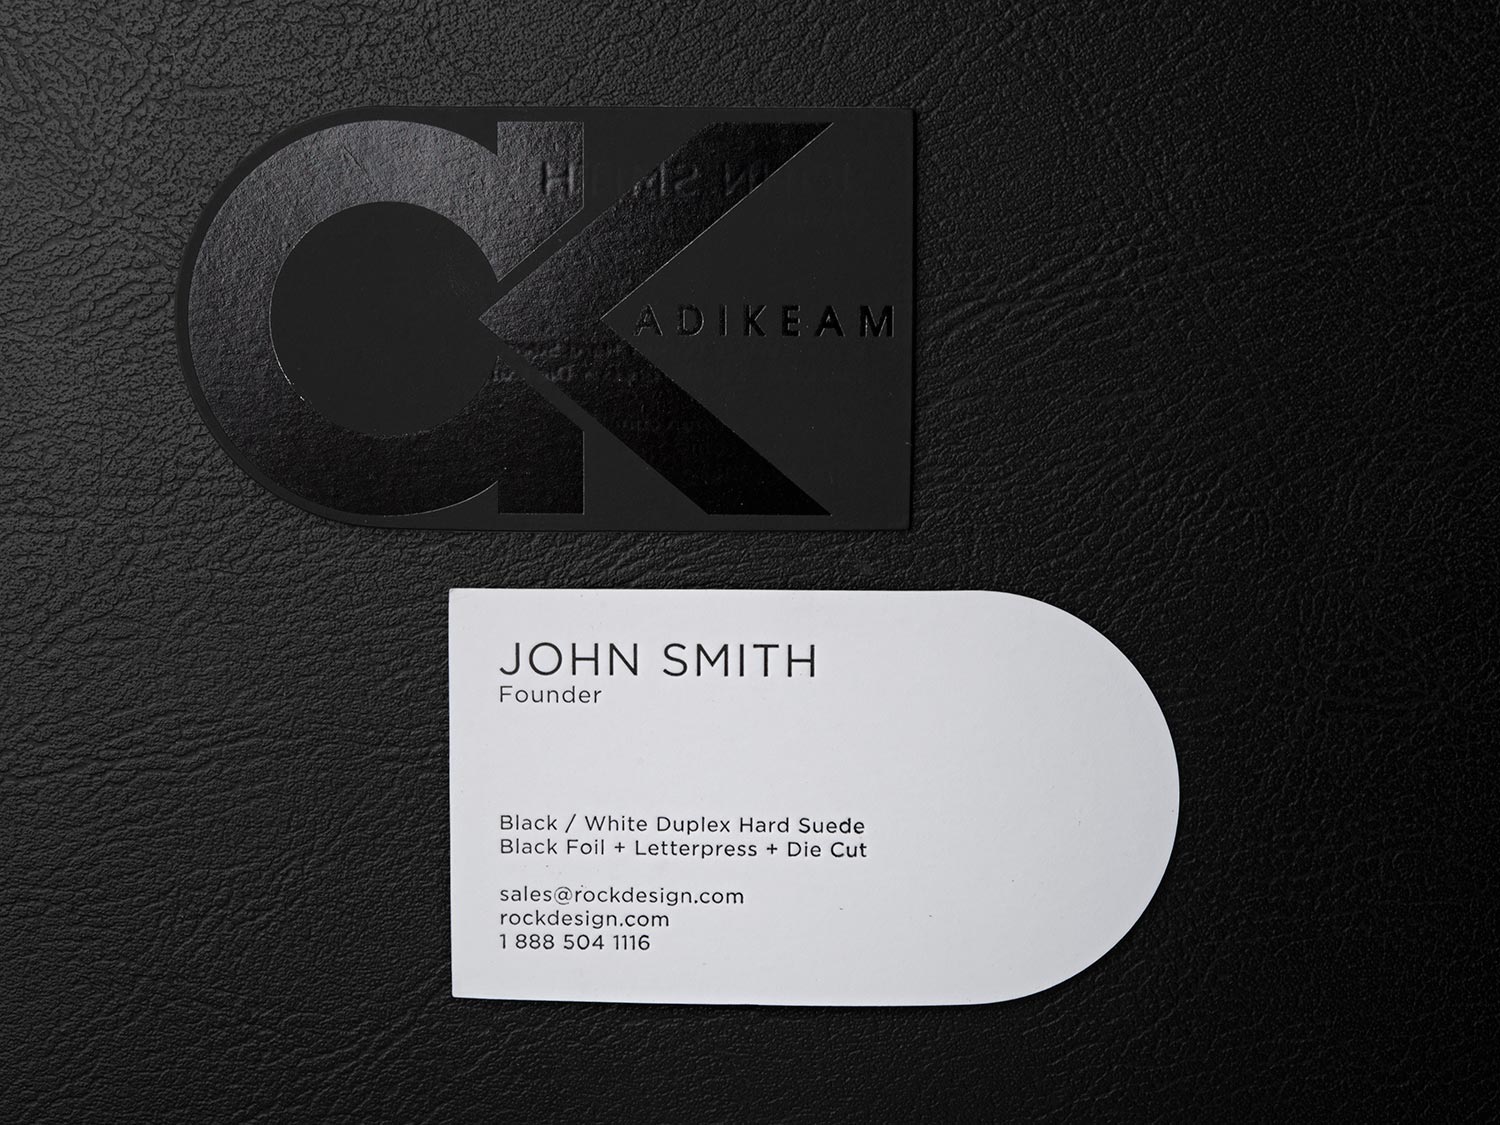 Bold business card premade calling card black and white Simple design Black business card customizable design business card template